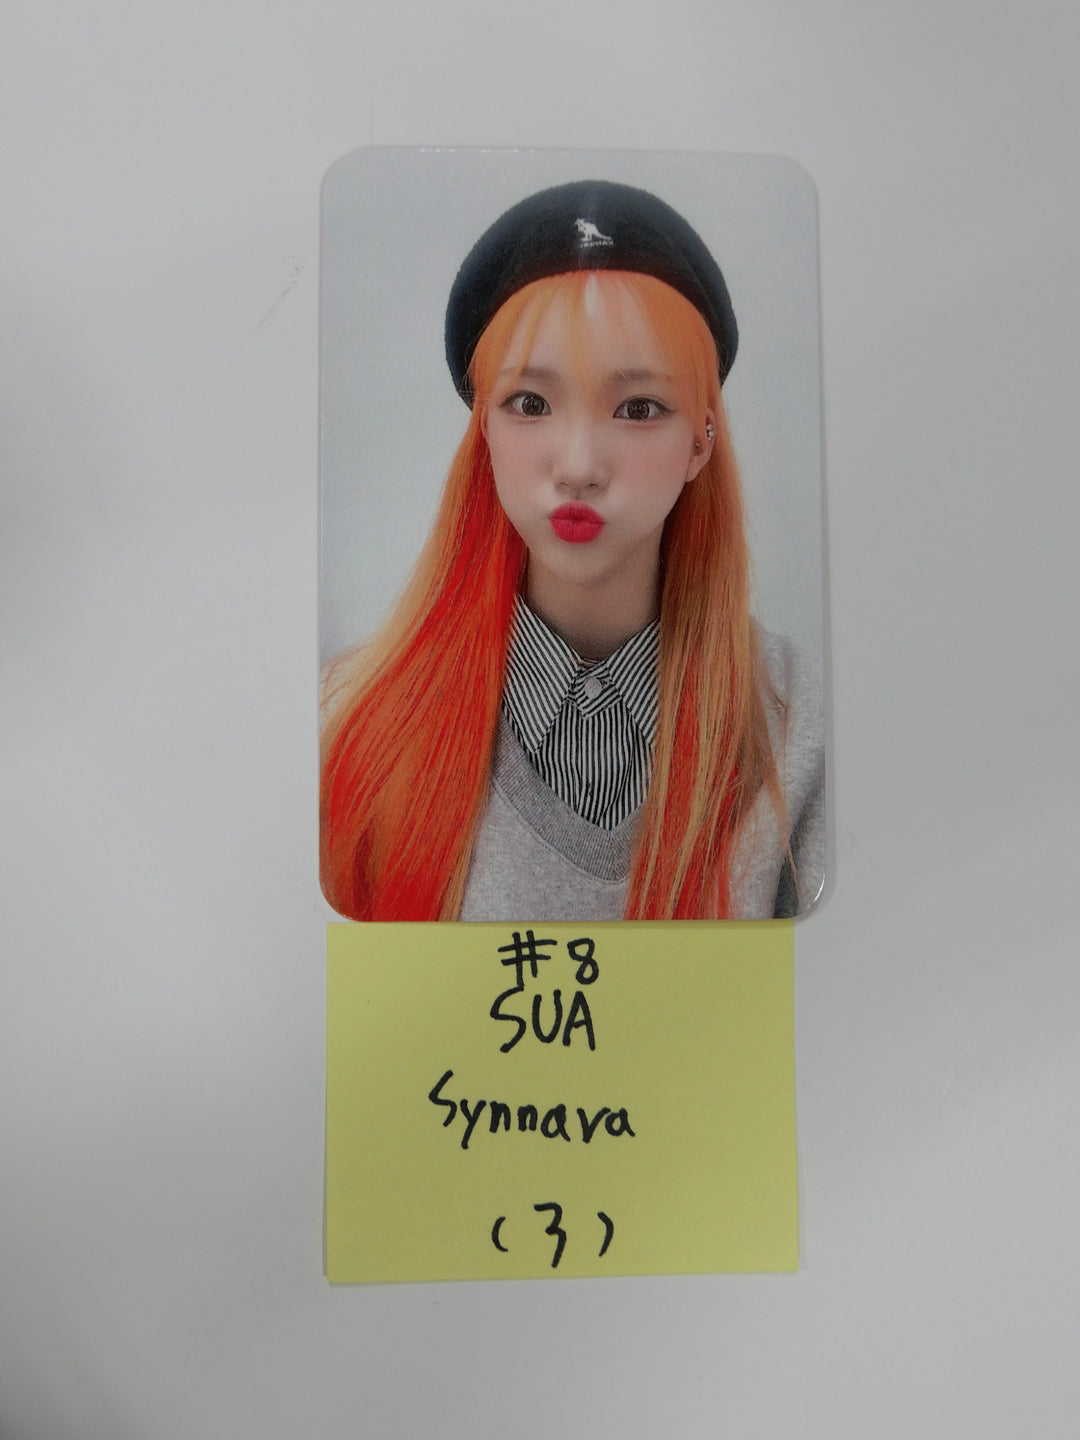 Pixy 'Bravery' - Synnara Fansign Event Preorder Benefit Photocard